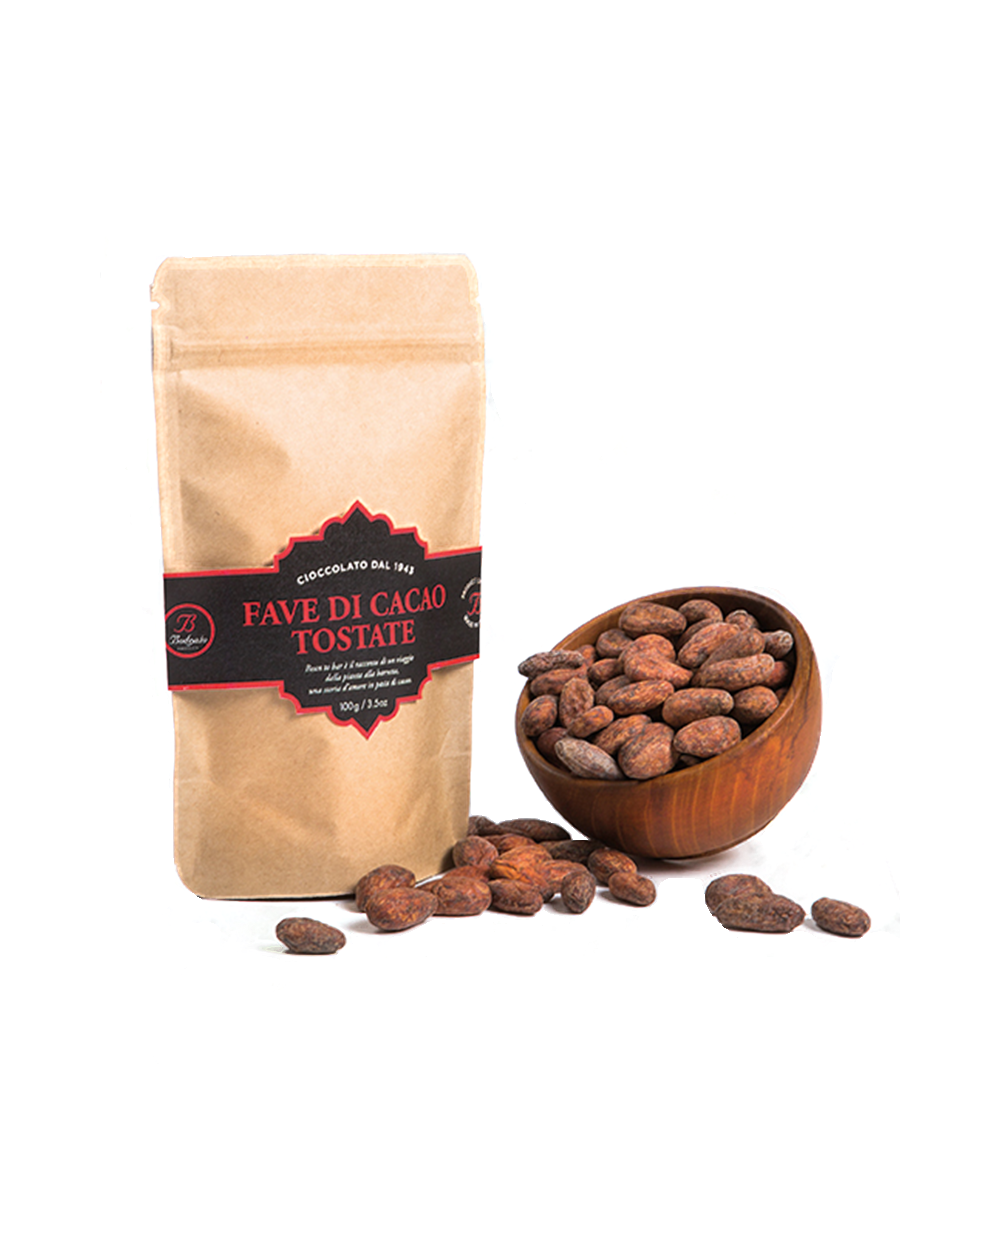 BAG OF TOASTED COCOA BEANS 100 G.